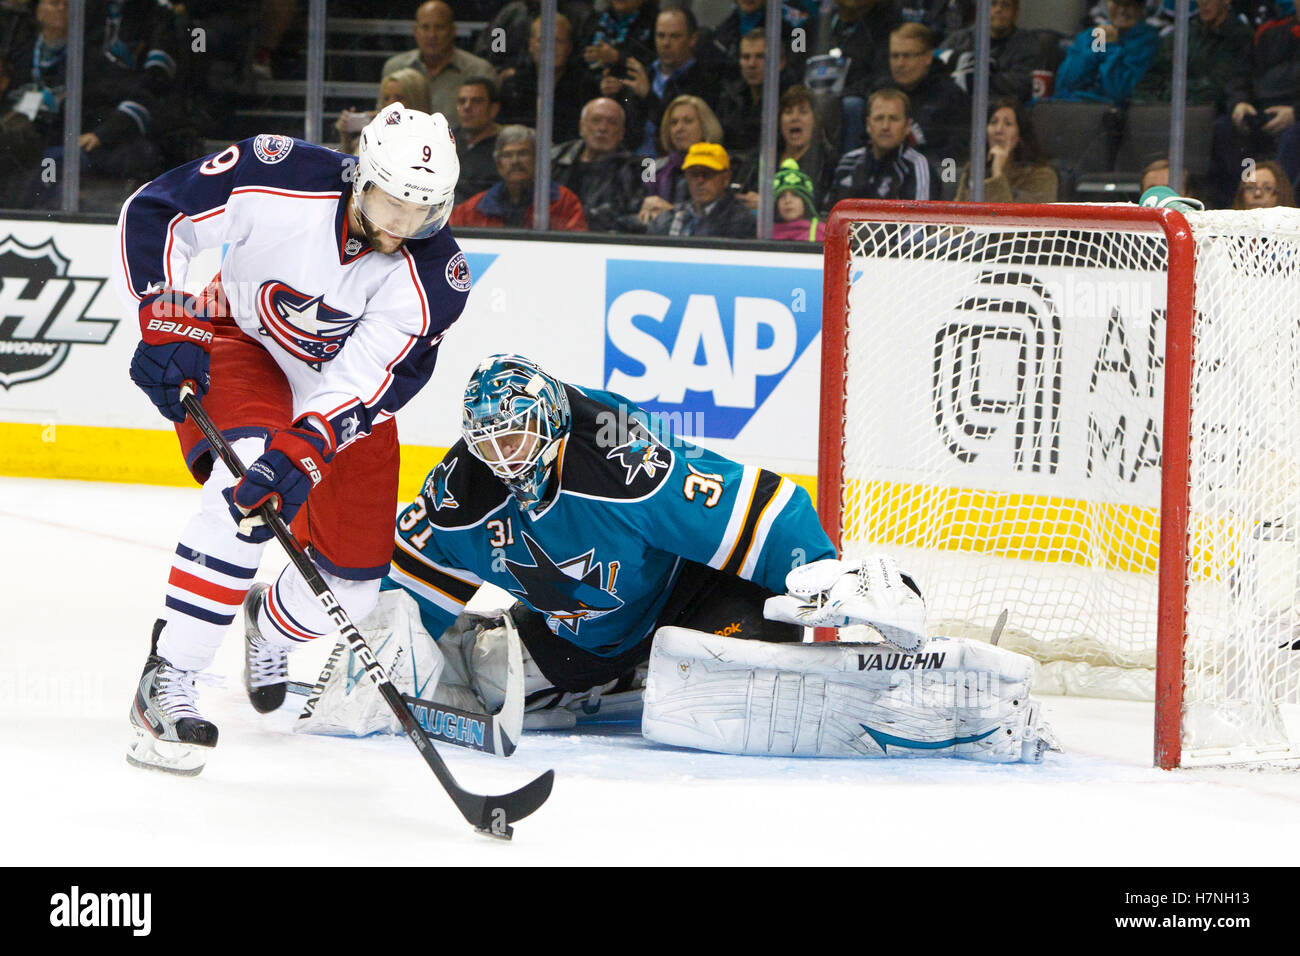 Jan 31, 2012; San Jose, CA, USA; San Jose Sharks goalie Antti Niemi (31) defends his goal in front of Columbus Blue Jackets left wing Colton Gillies (9) during the first period at HP Pavilion. Stock Photo